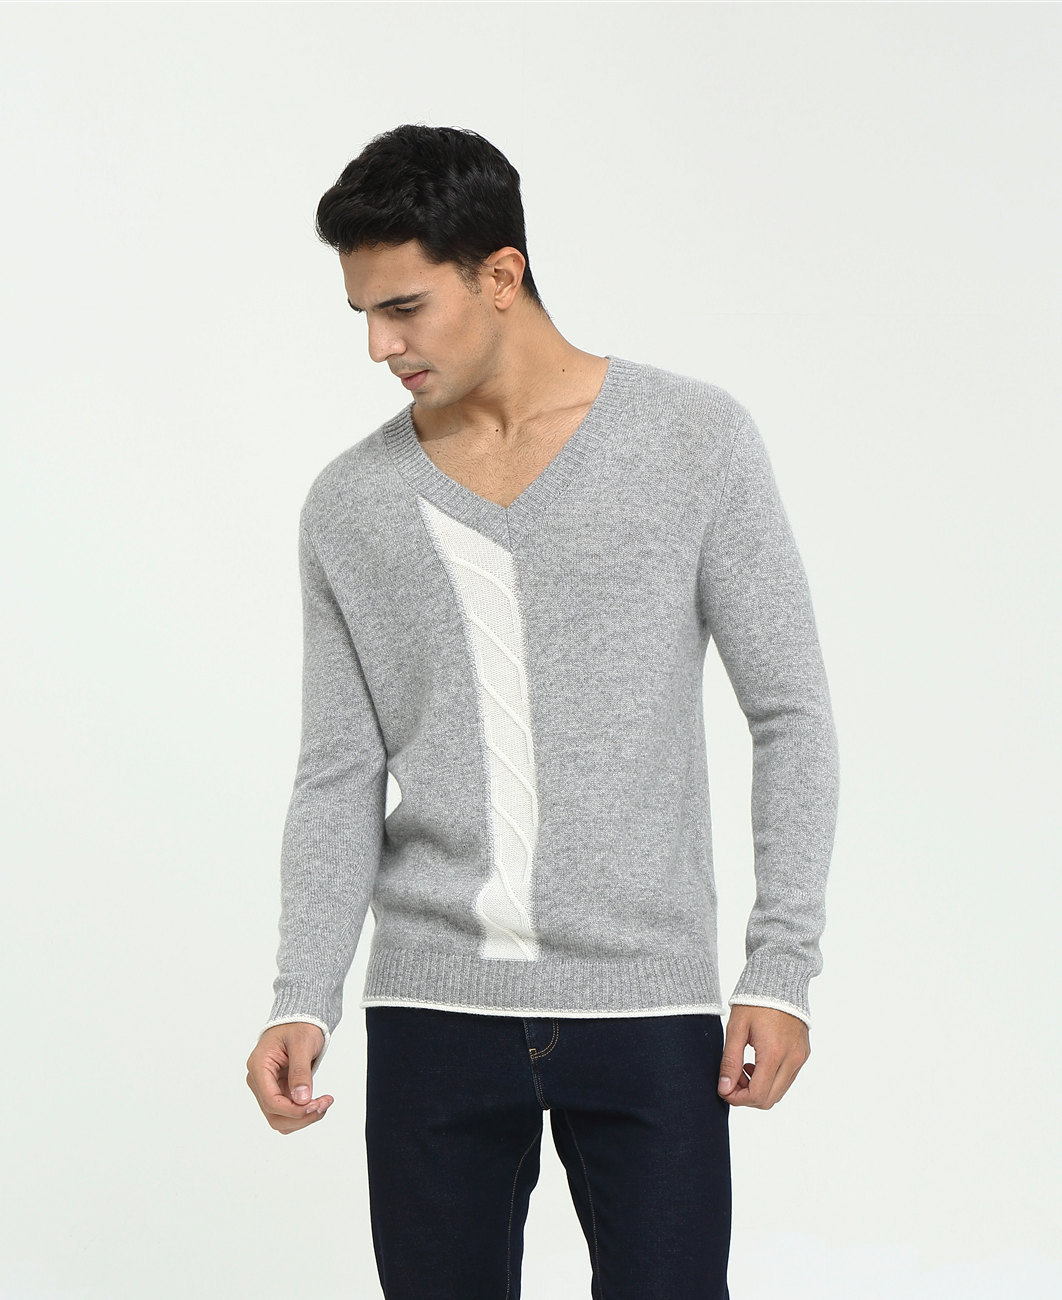 Wholesale high quality long sleeve 100% pure cashmere v neck sweater ...